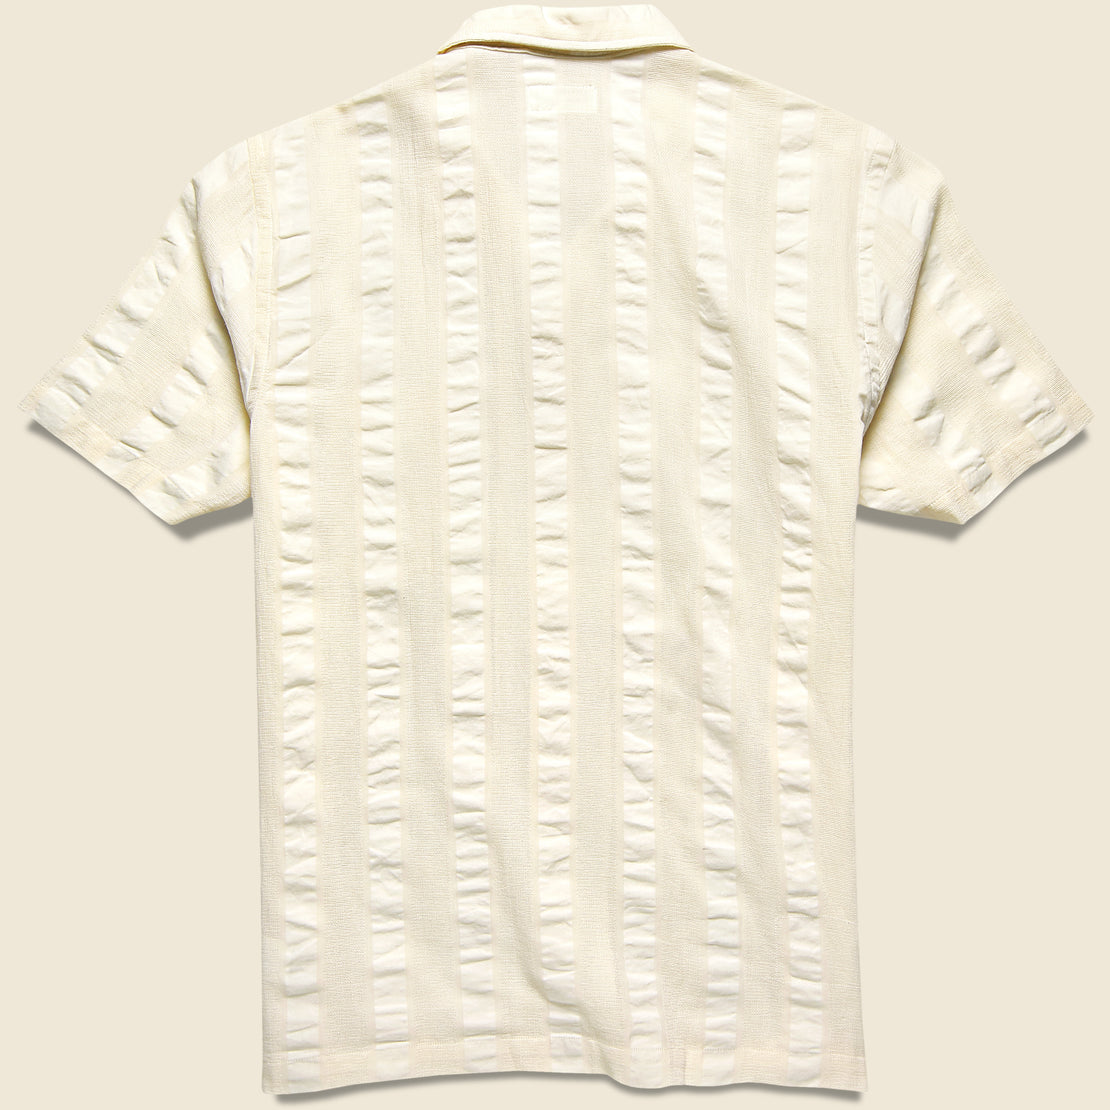 Self Stripe Road Shirt - White - Universal Works - STAG Provisions - Tops - S/S Woven - Stripe